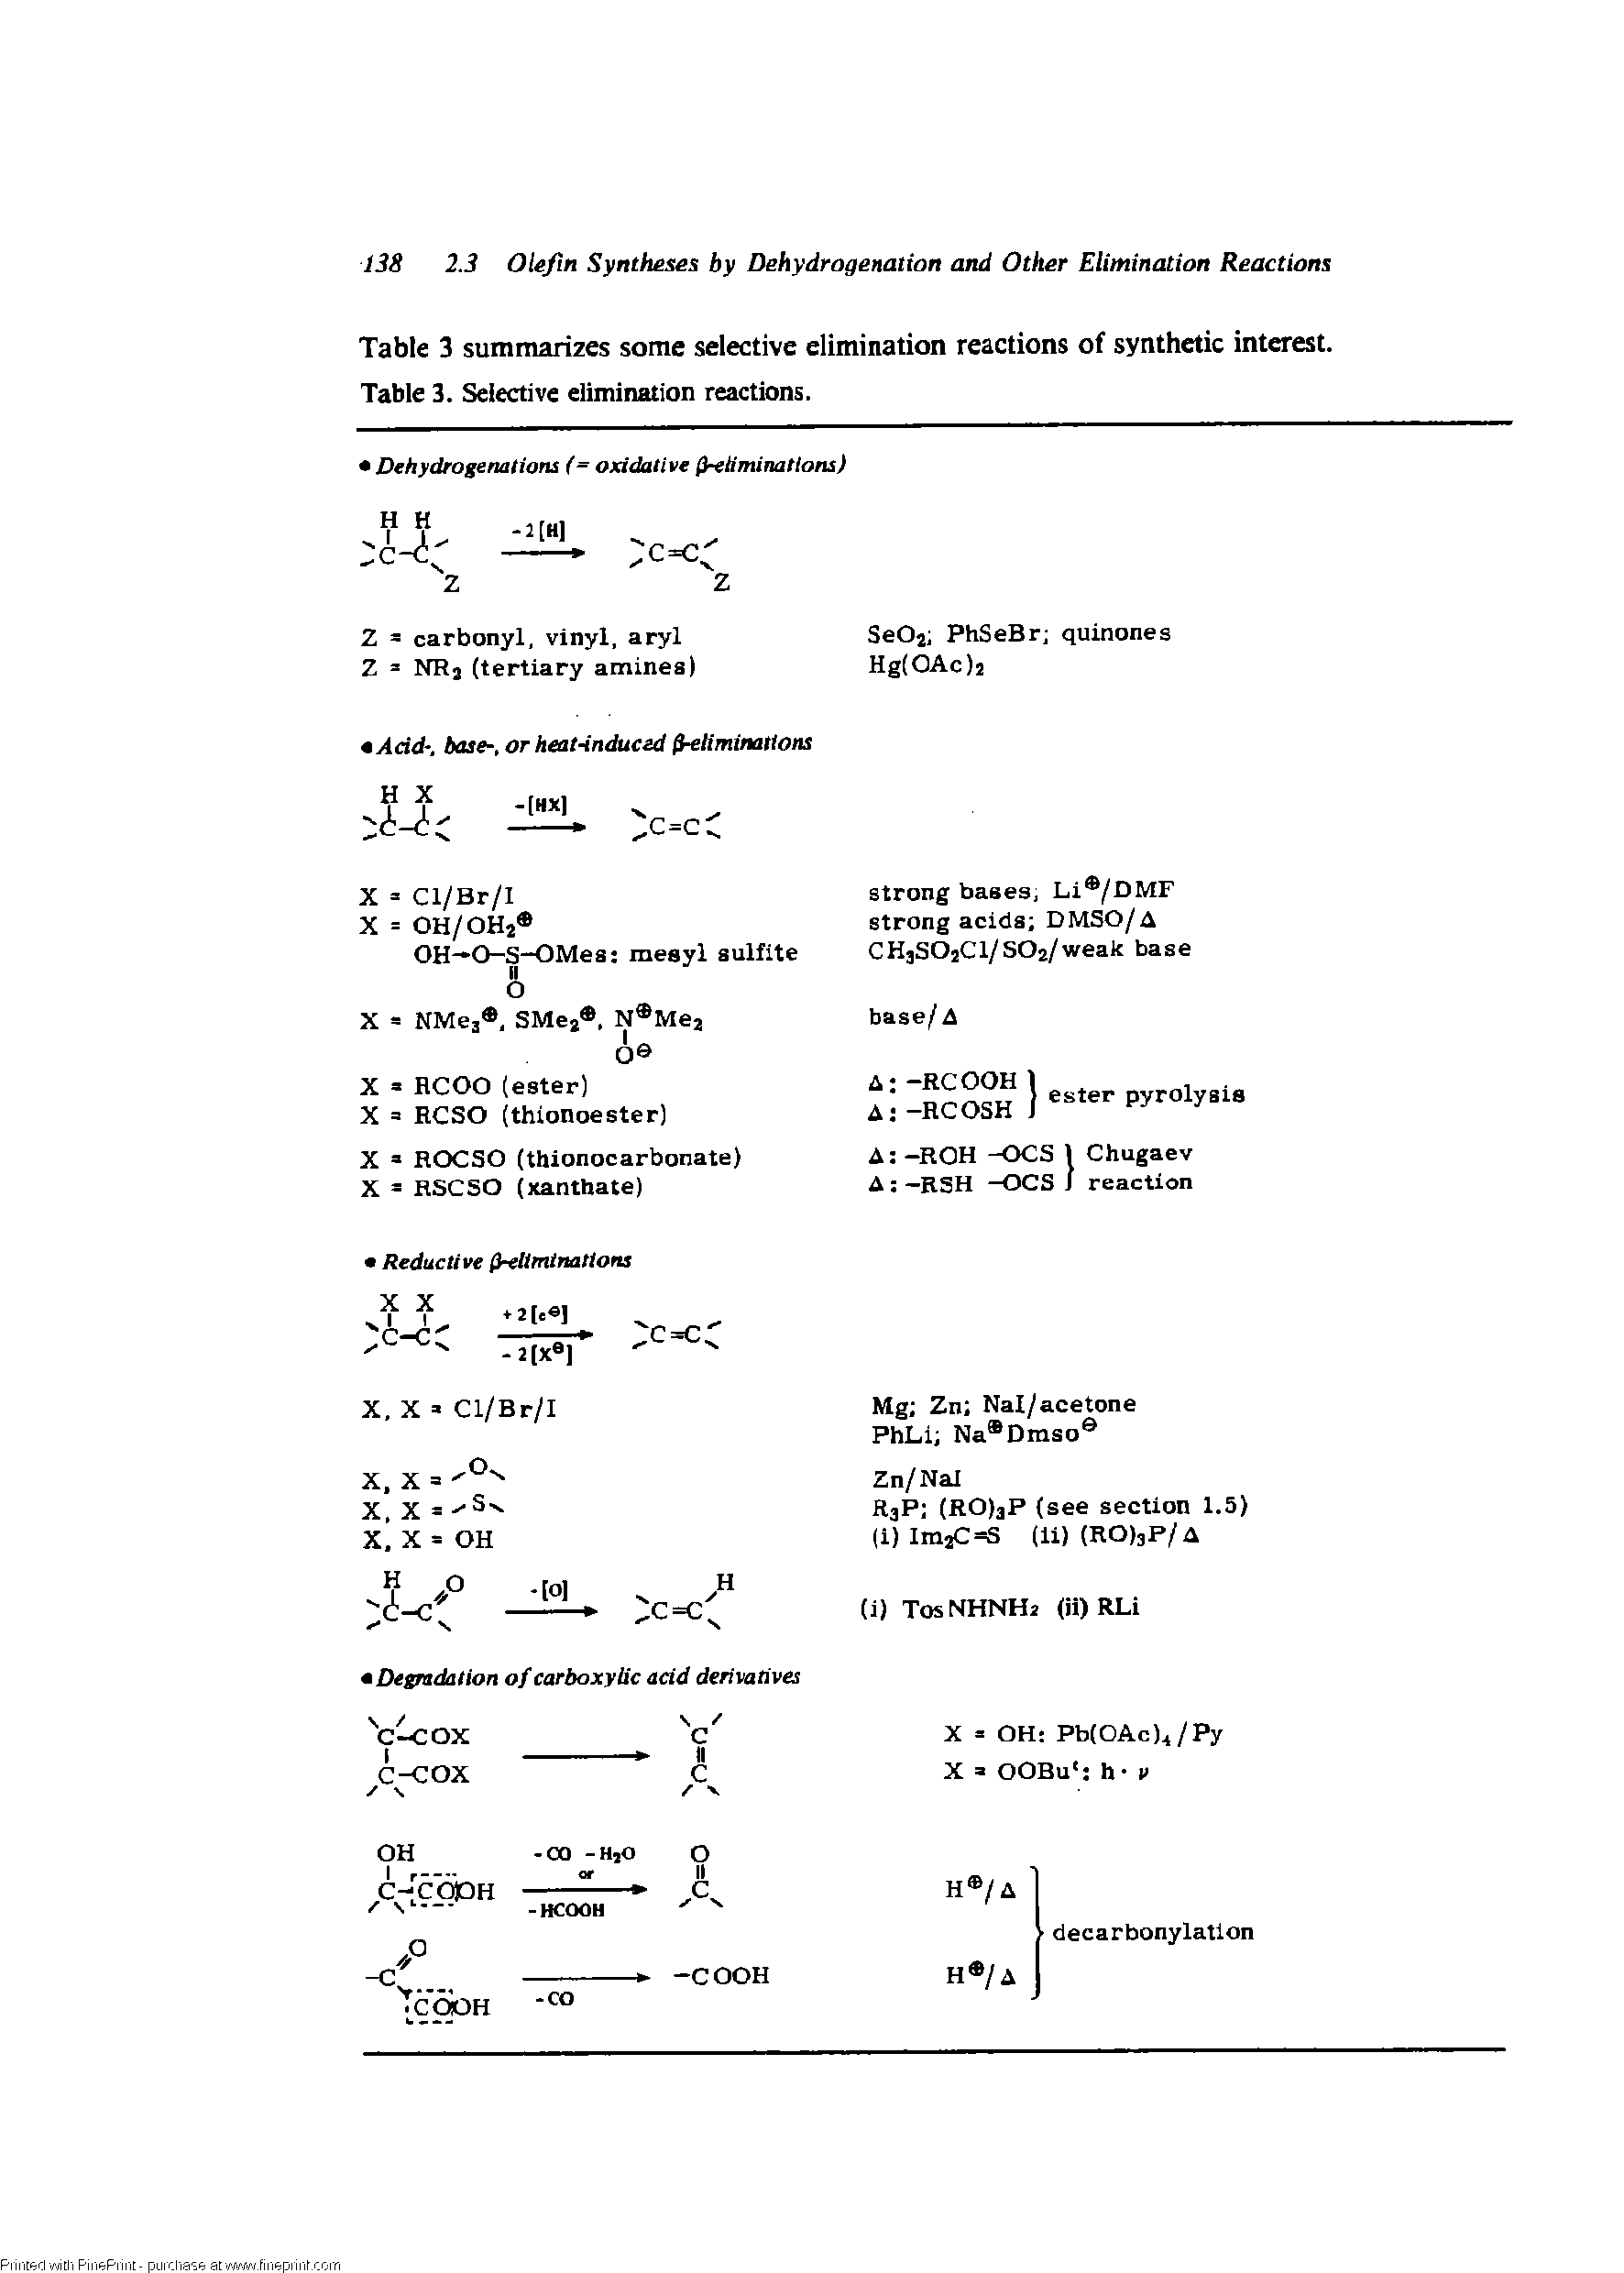 Table 3 summarizes some selective elimination reactions of synthetic interest. Table 3. Selective elimination reactions.